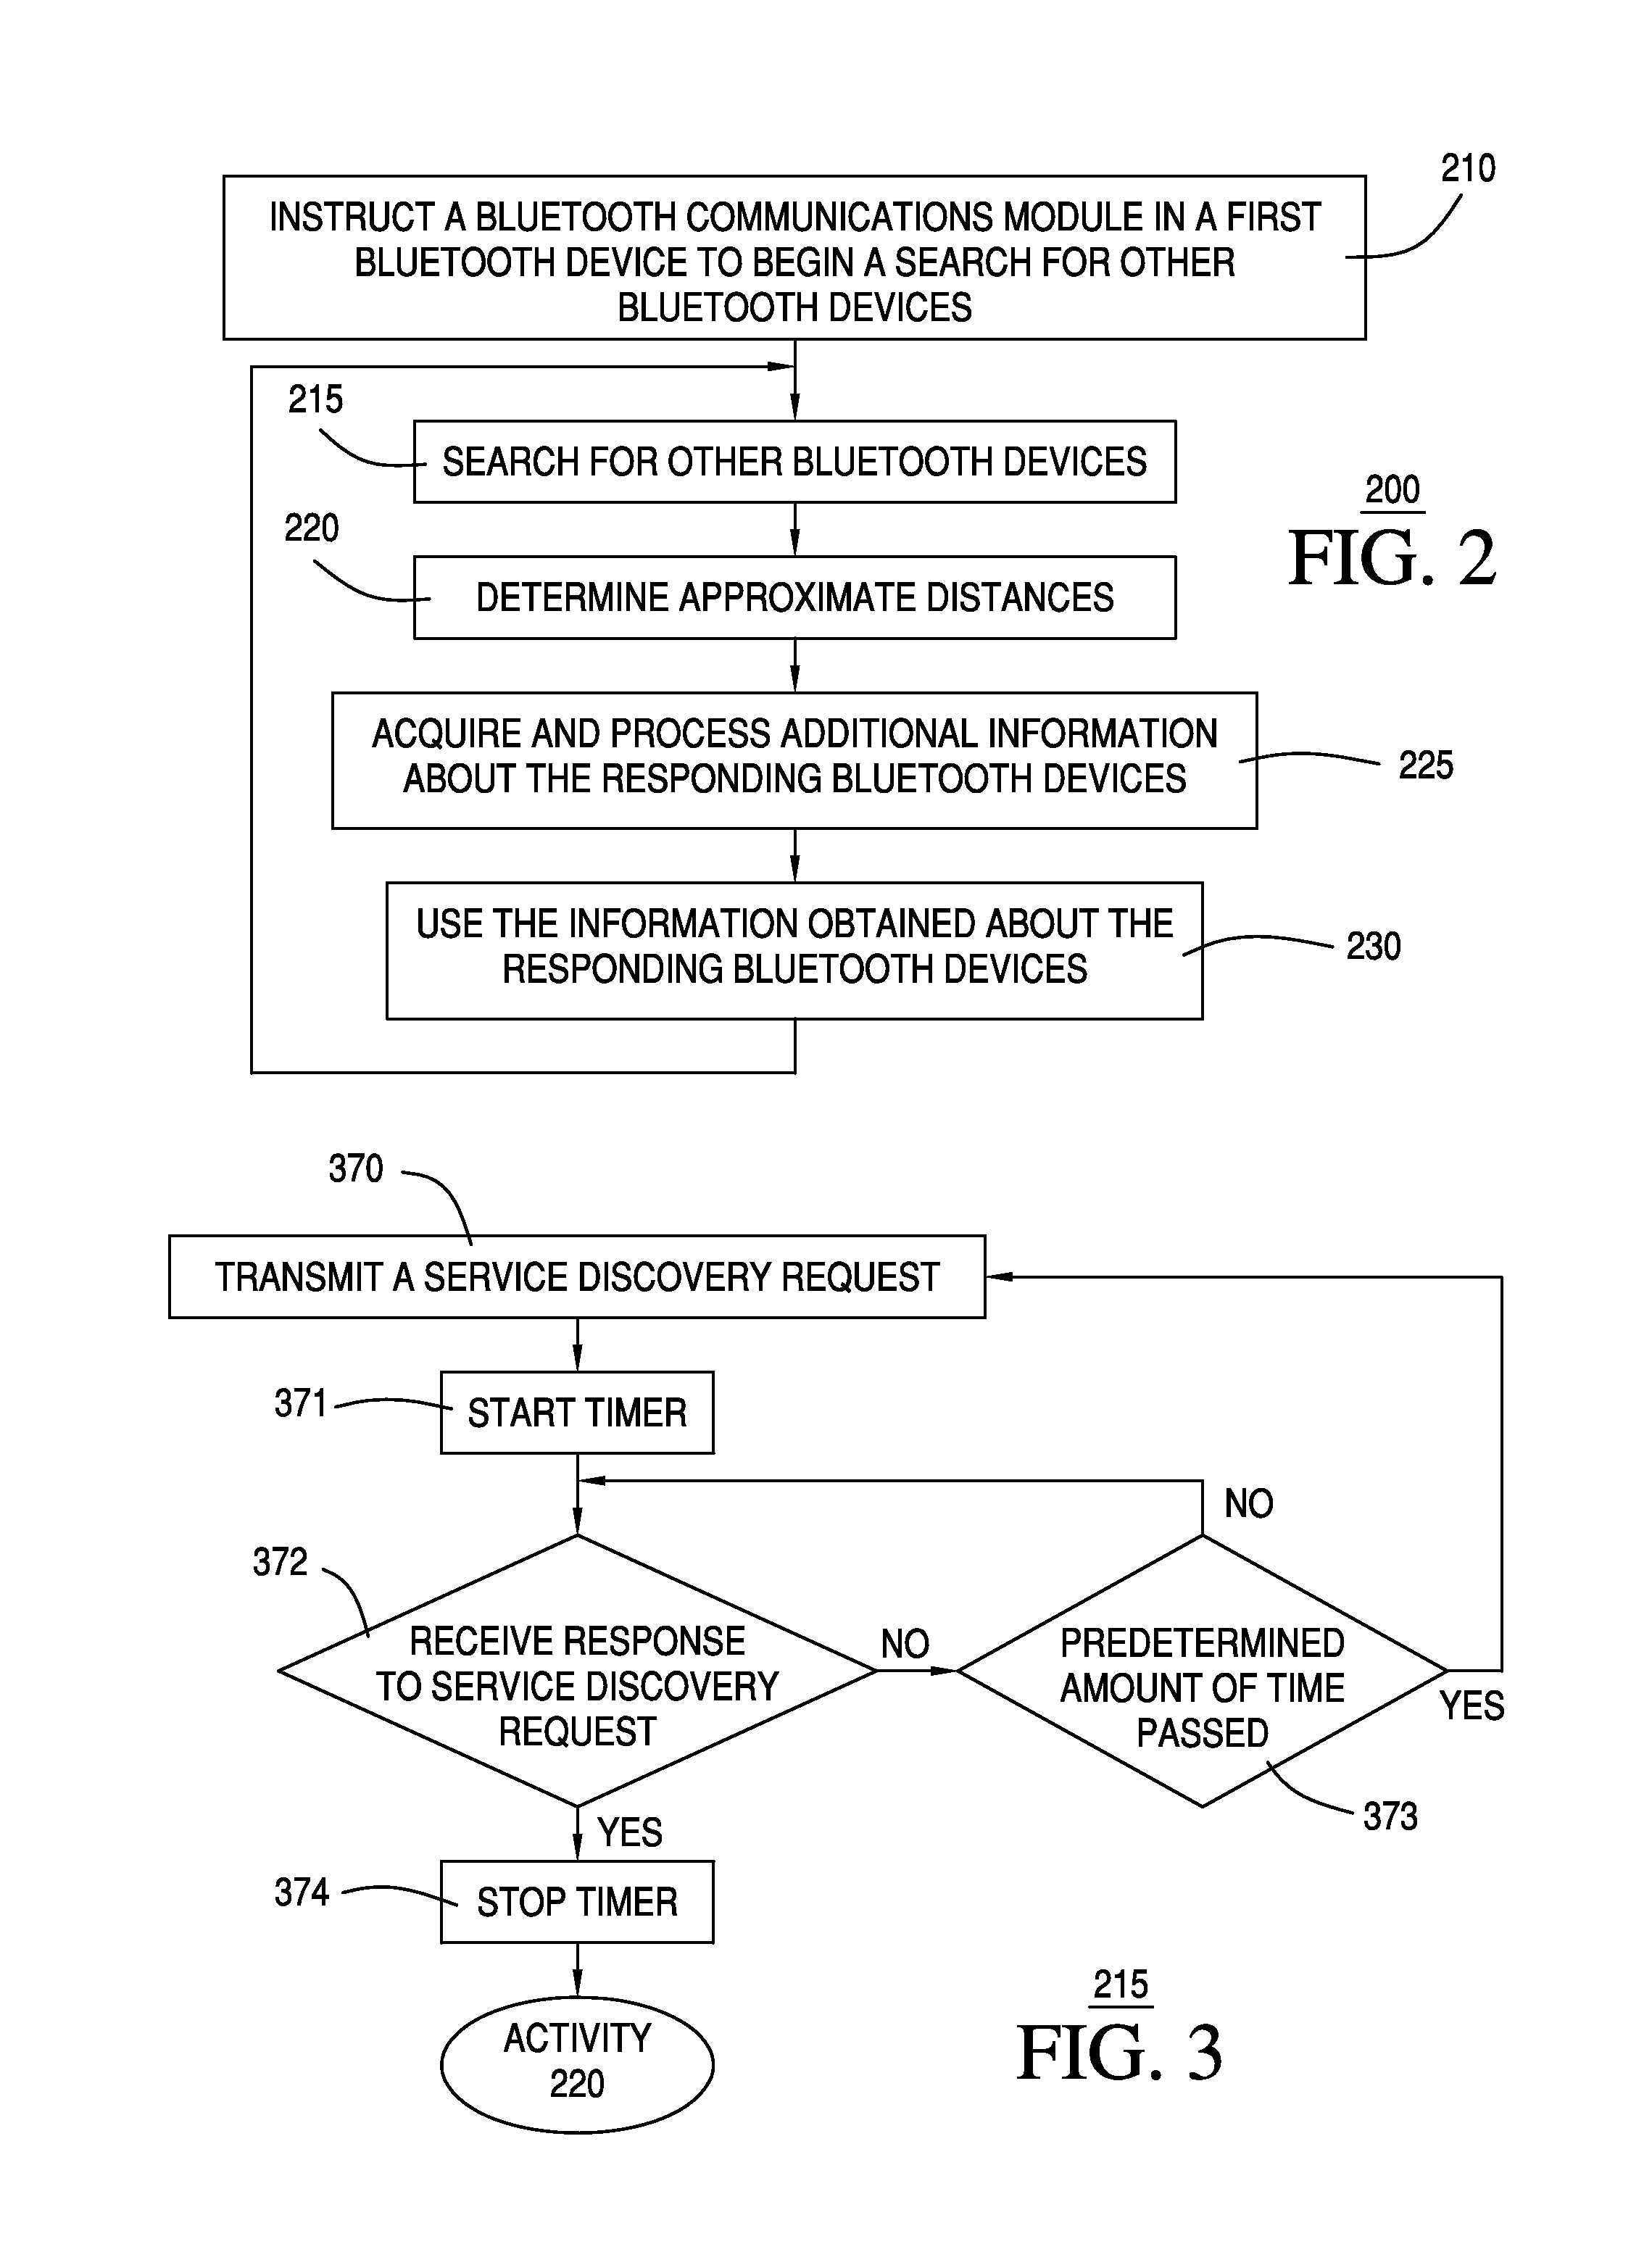 Bluetooth Proximity Detection System and Method of Interacting With One or More Bluetooth Devices